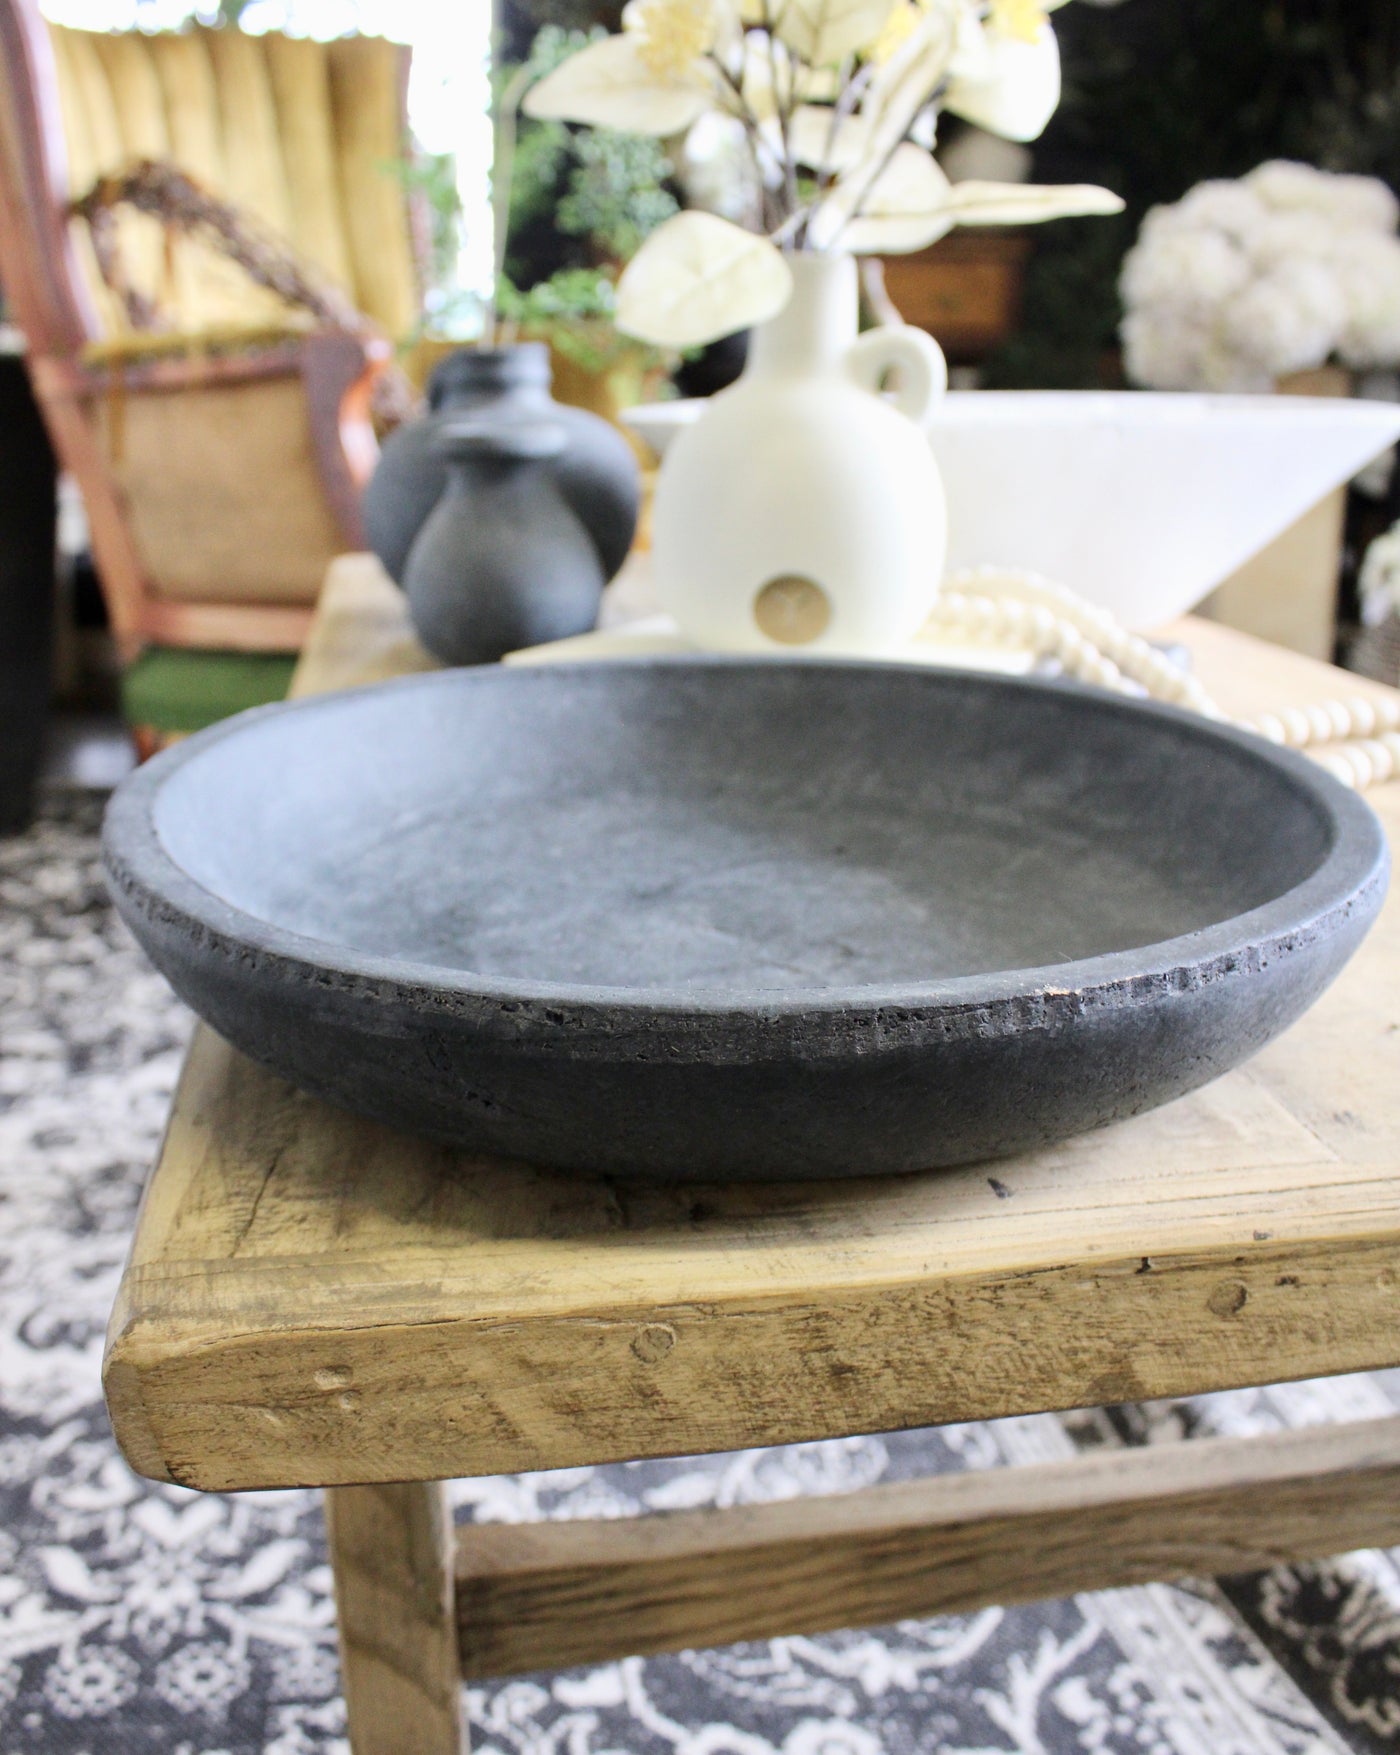 Black Clay Plate